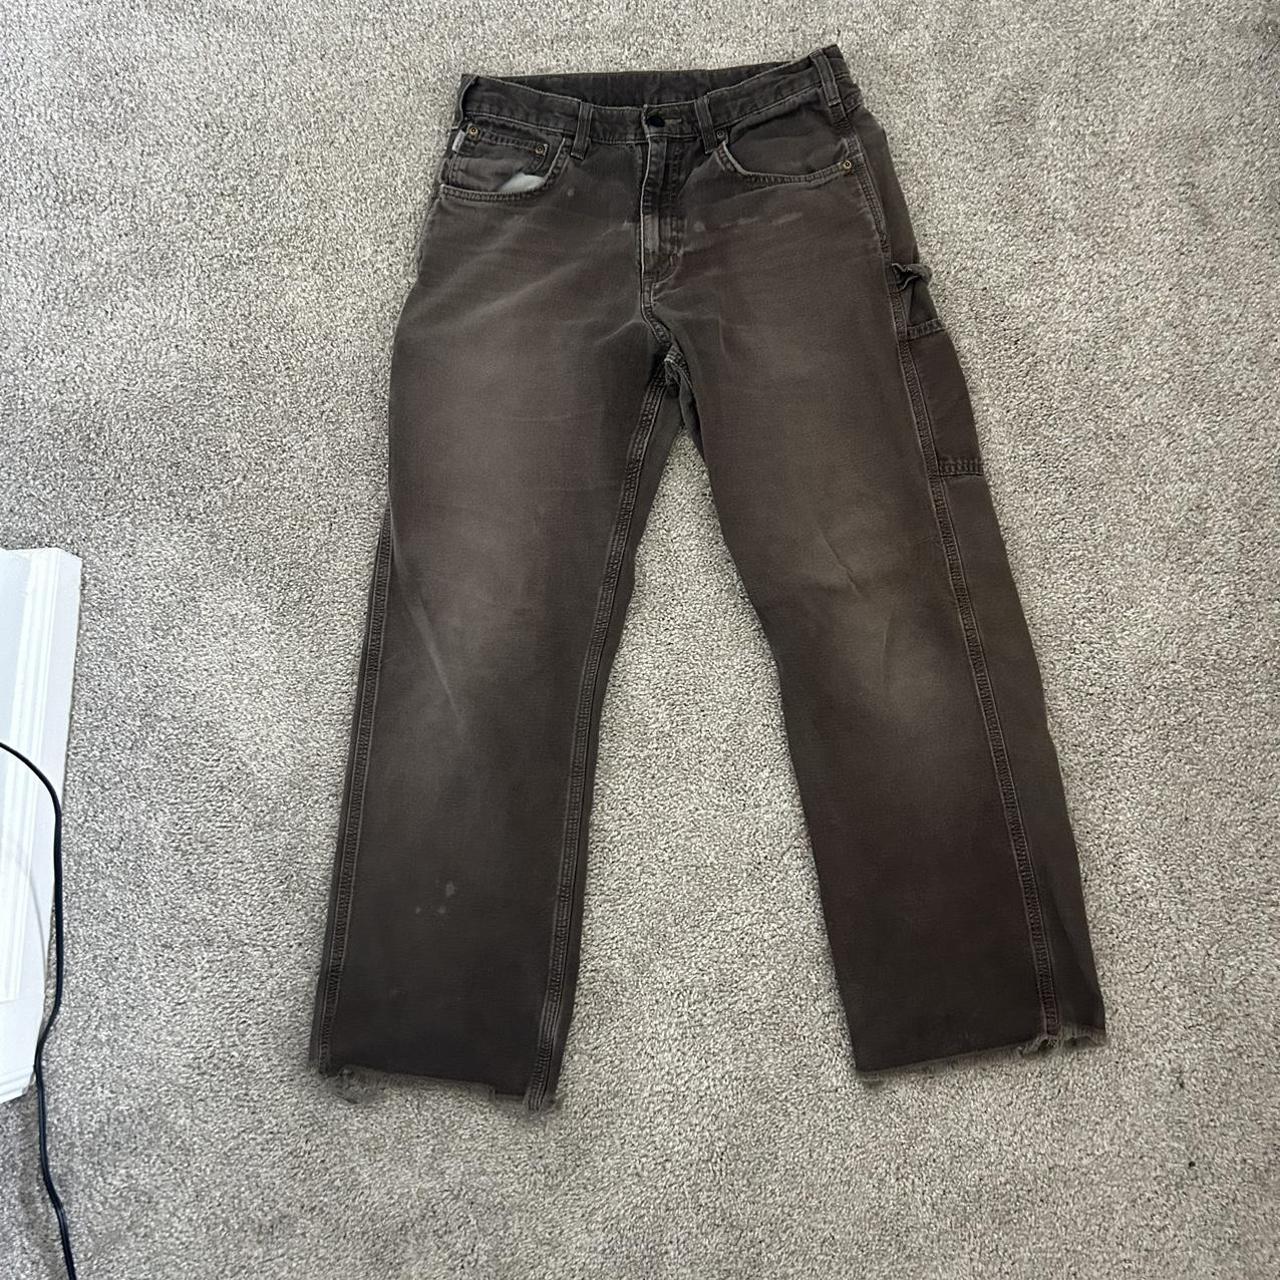 32x32 cropped to a 32x30 brown carhartt pants - Depop